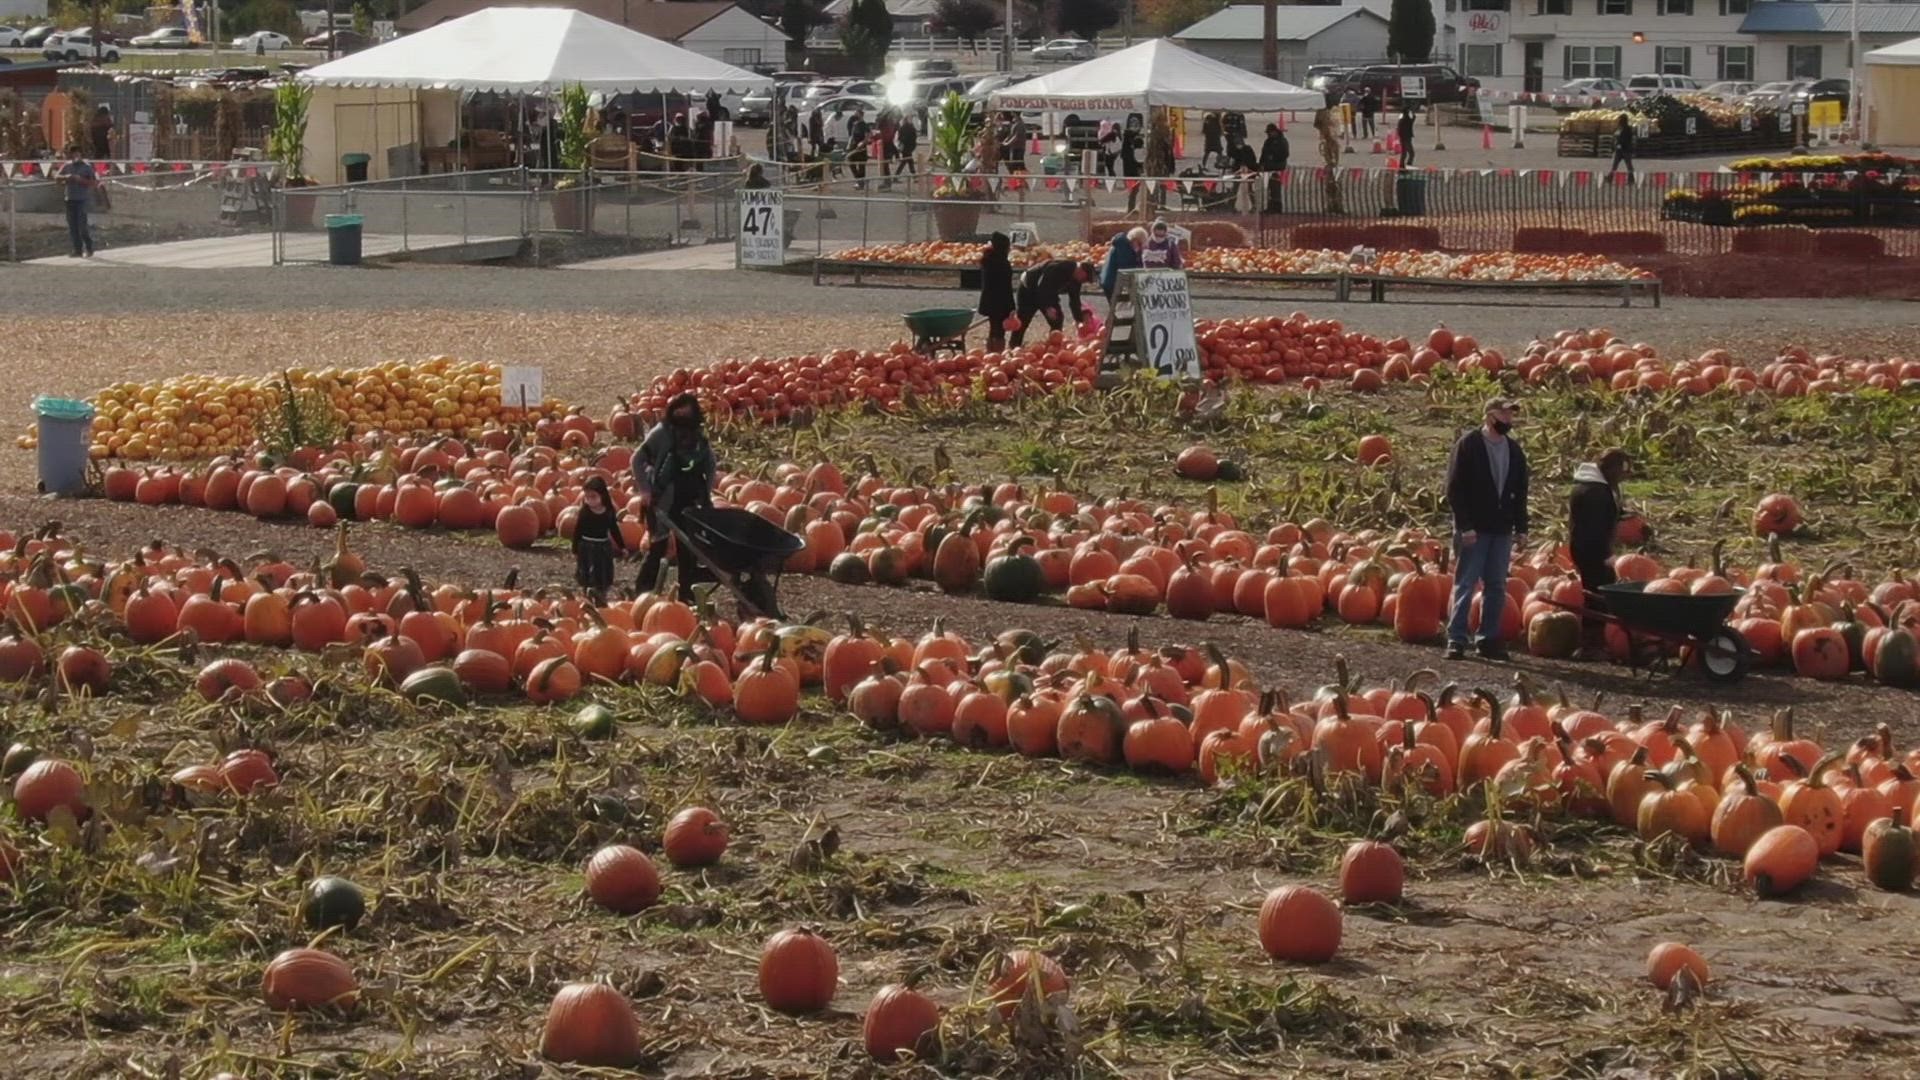 Take in a bird's-eye view of Carpinito Bros Pumpkin Patch & Corn Maze in Kent, which has been named one of the "Best Pumpkin Patches" in the nation by Yelp.